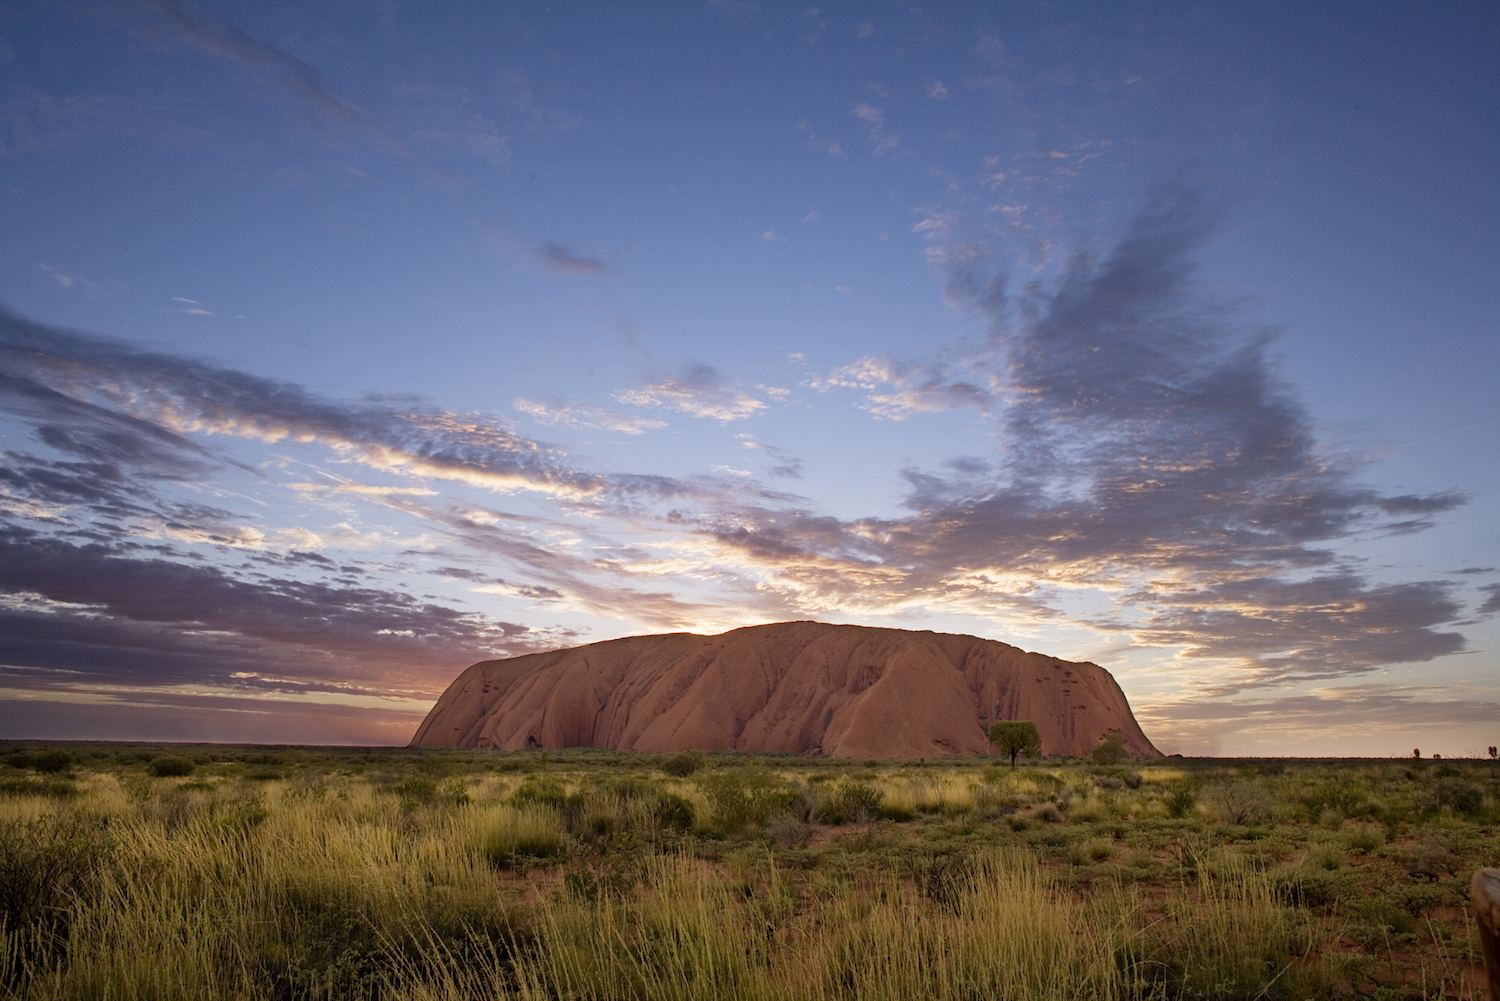 Experience bush luxury and outback experiences in Australia at Uluru at dusk